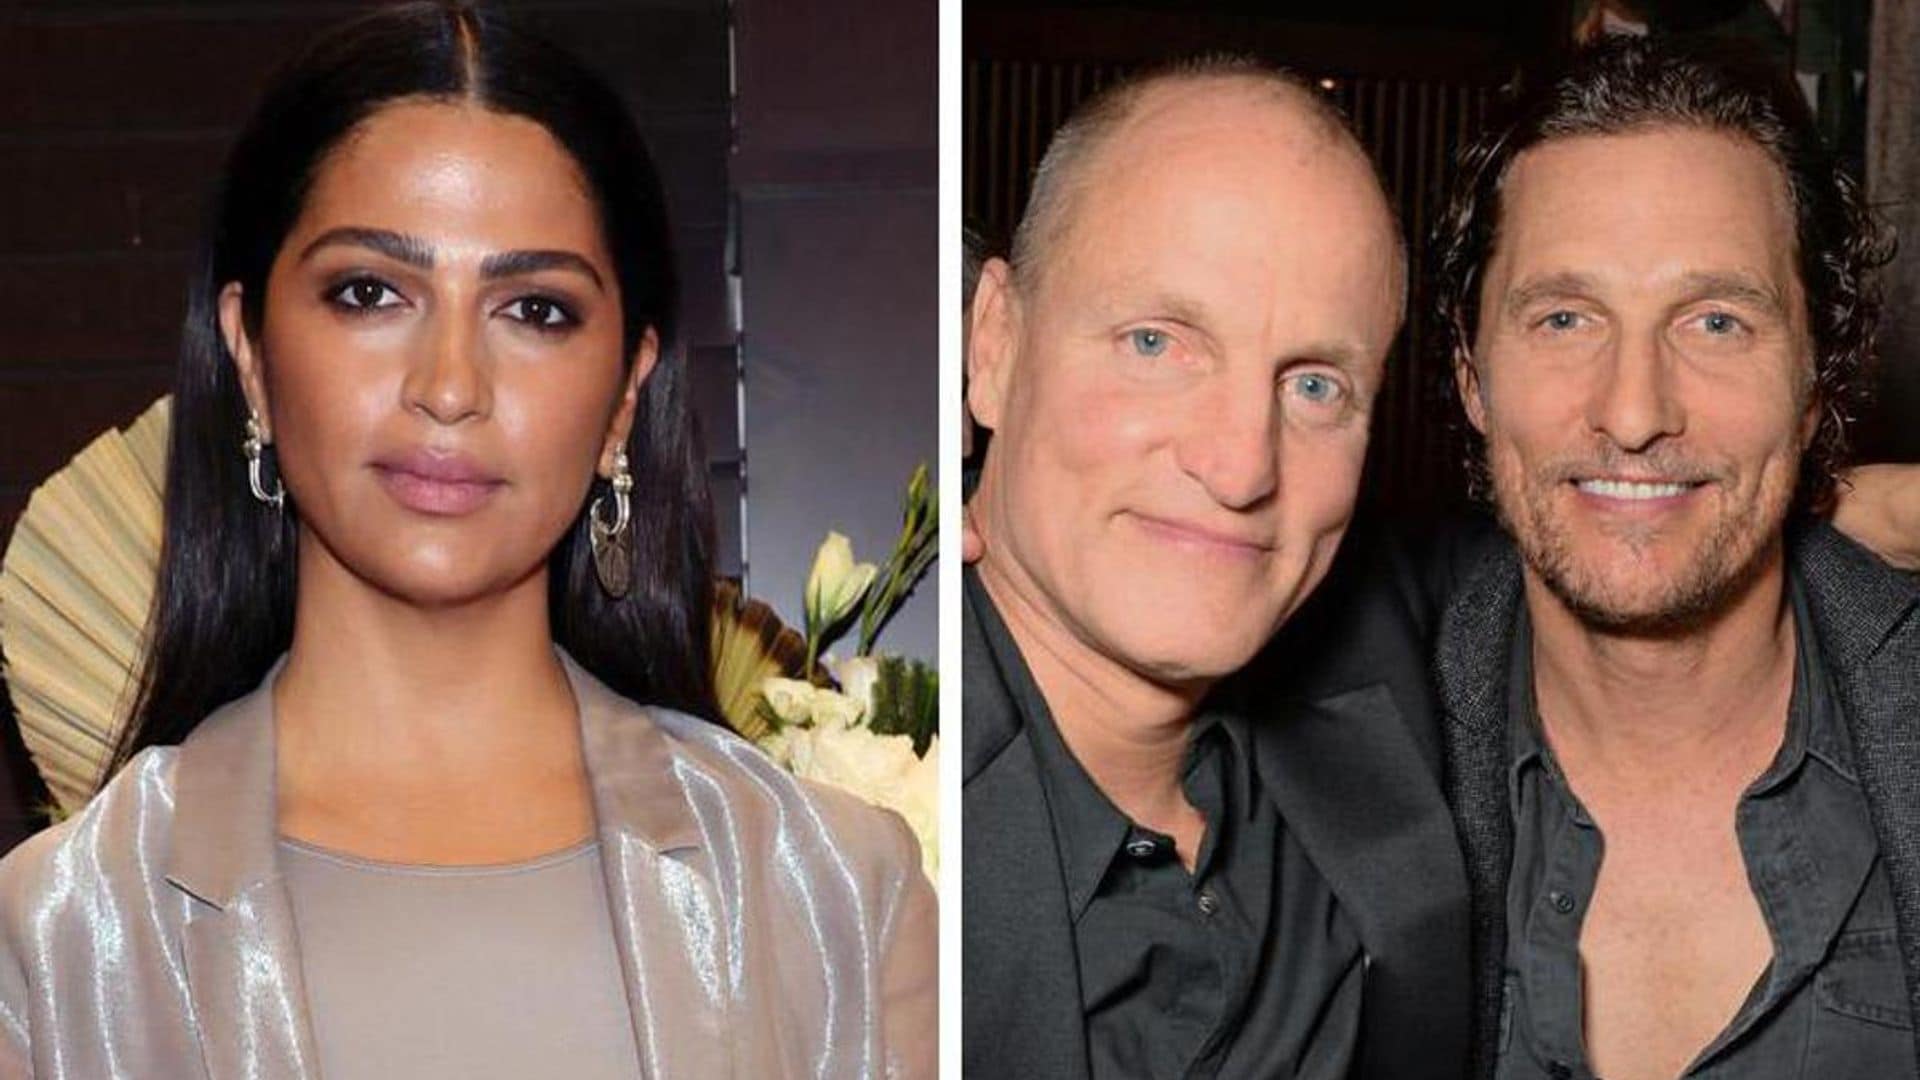 Camila Alves shares hilarious story about Matthew McConaughey and Woody Harrelson’s bromance